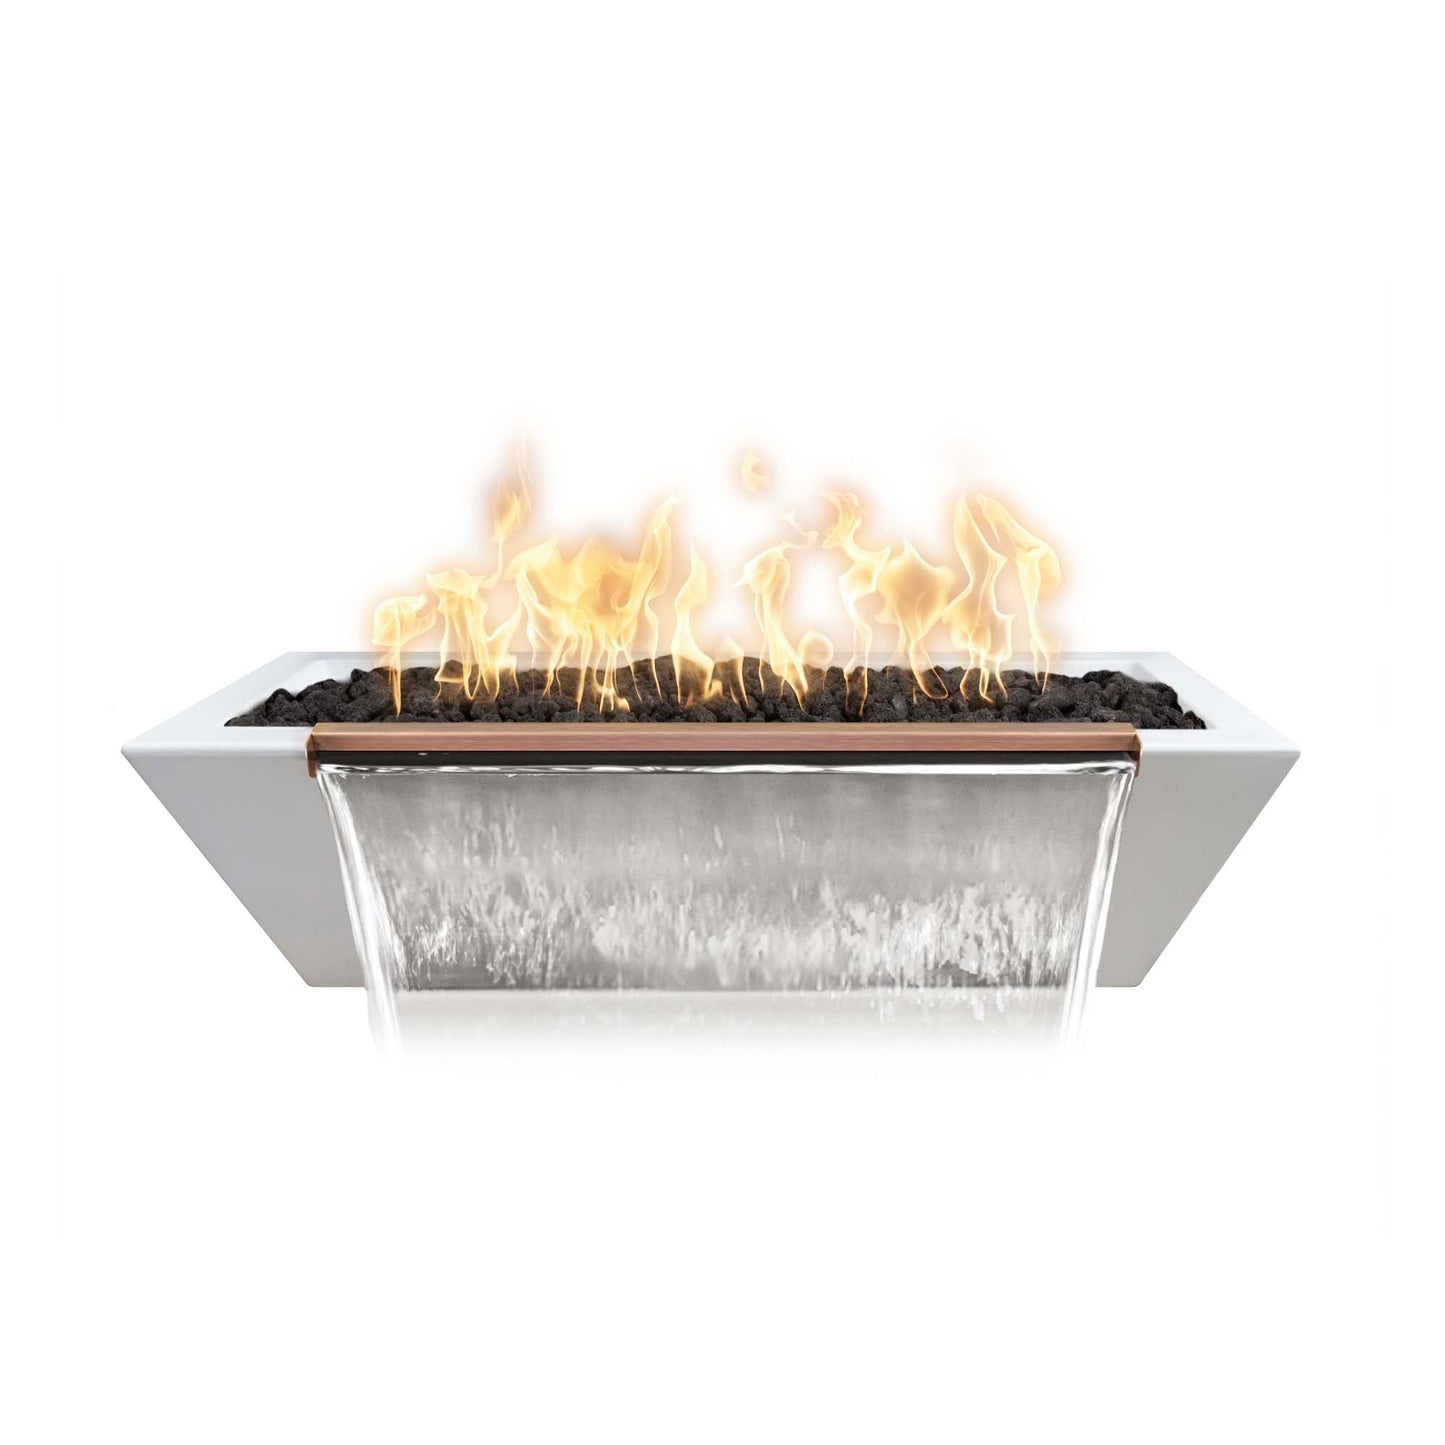 The Outdoor Plus Linear Maya 60" Rustic White GFRC Concrete Liquid Propane Fire & Water Bowl with 12V Electronic Ignition